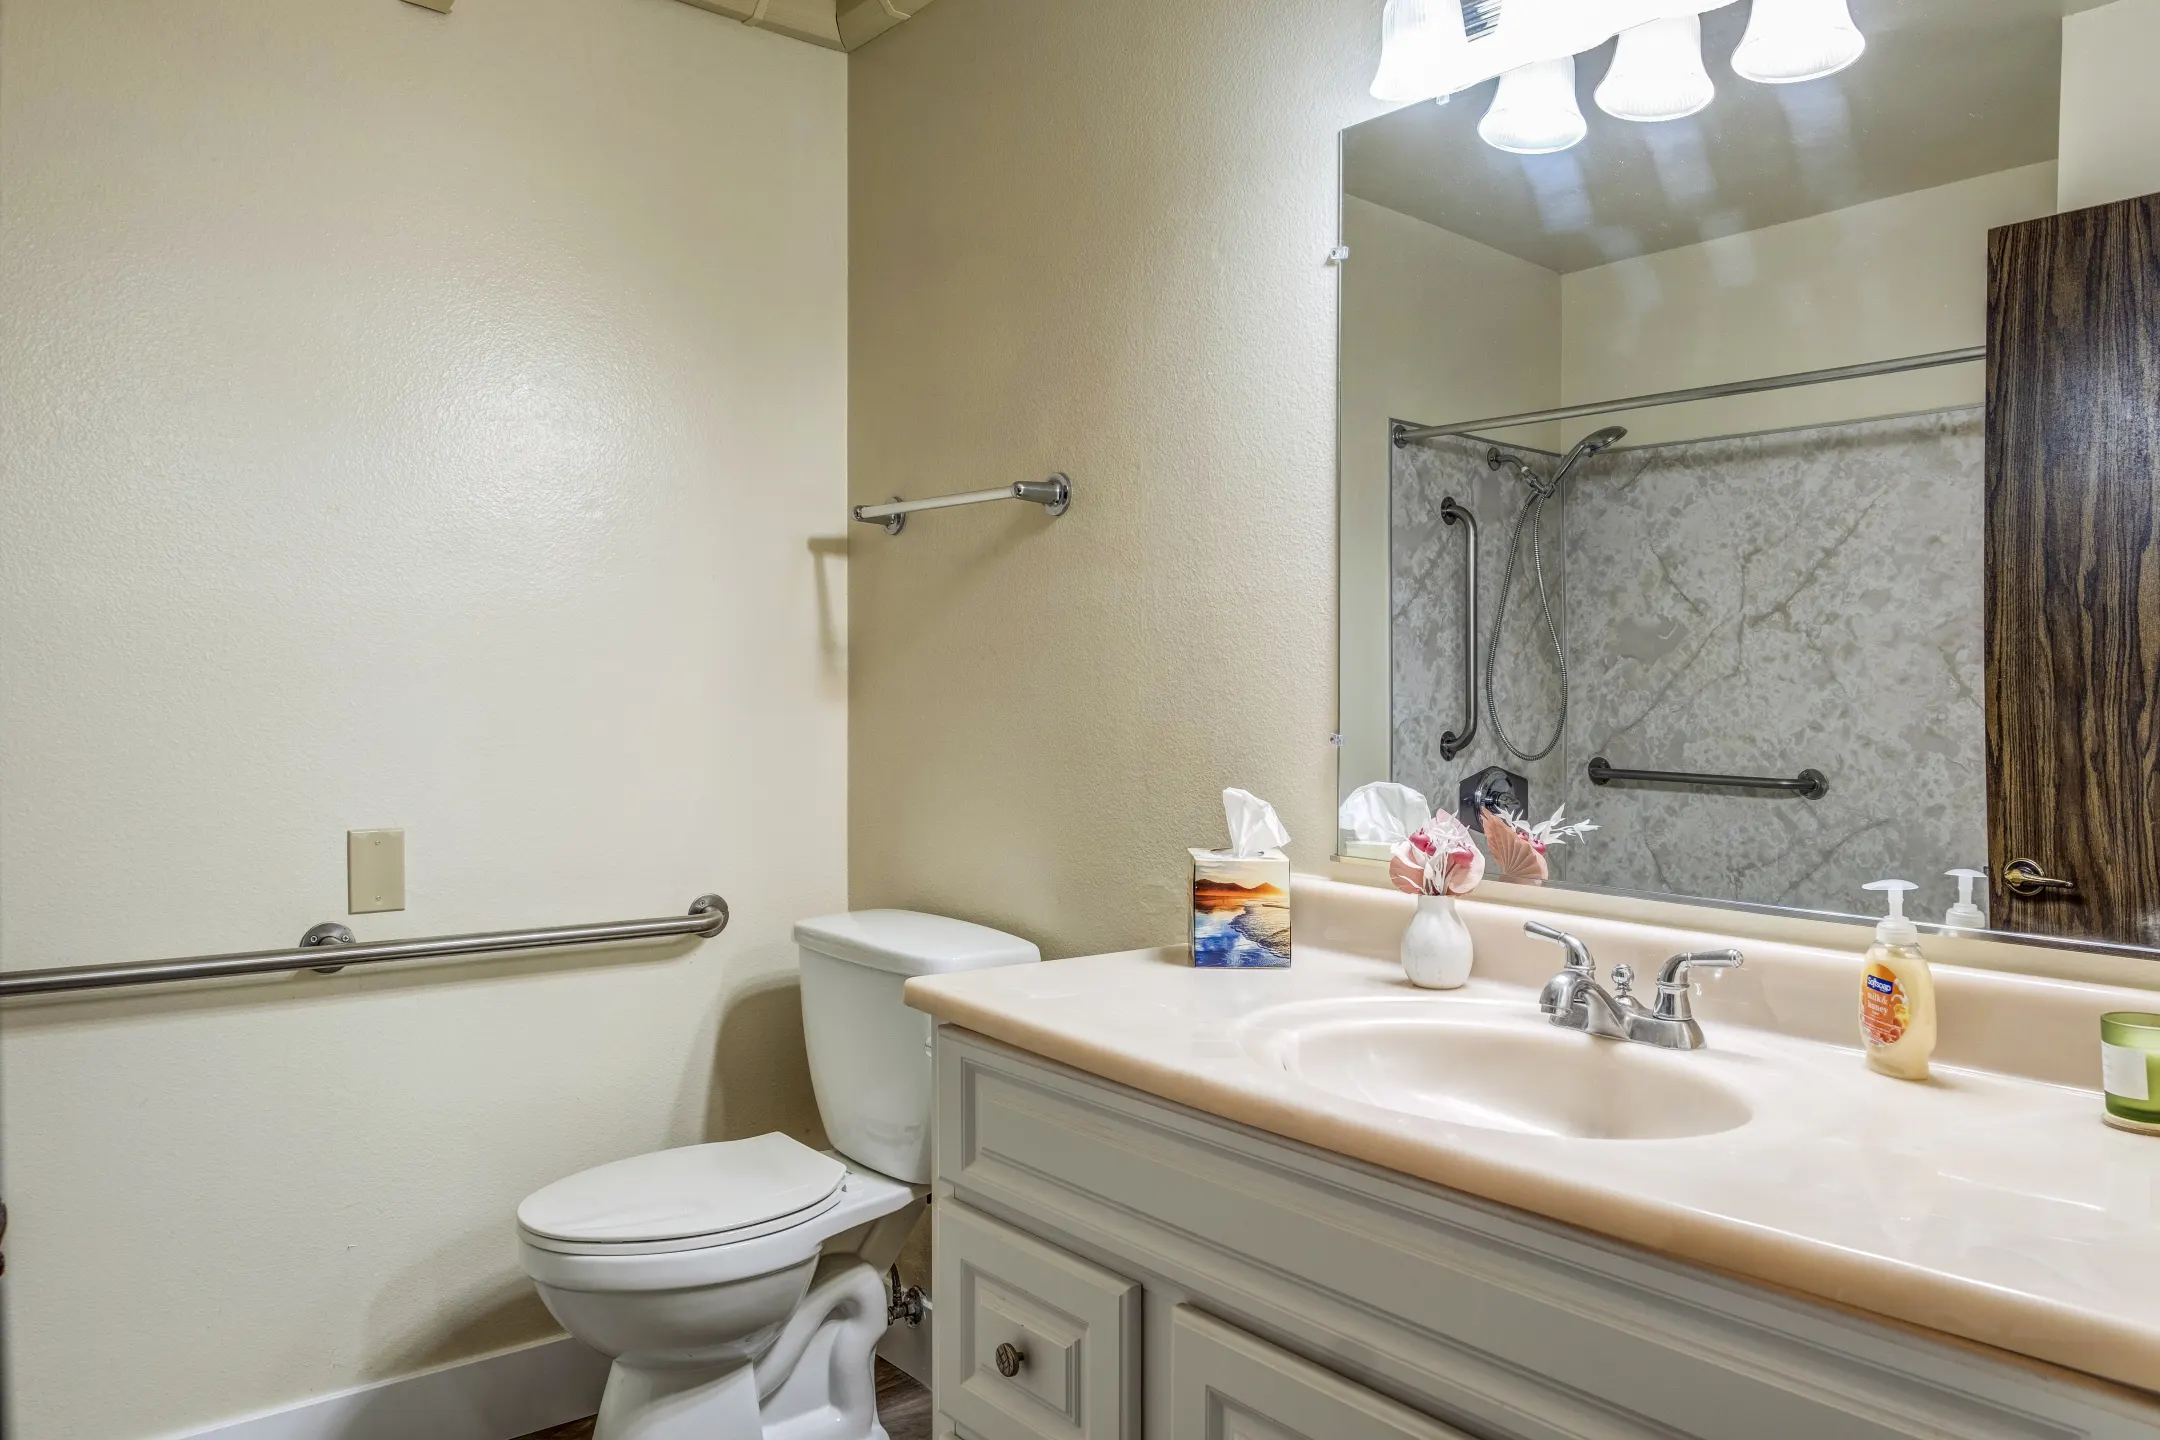 Bathroom - The Crest at Citrus Heights - Citrus Heights, CA